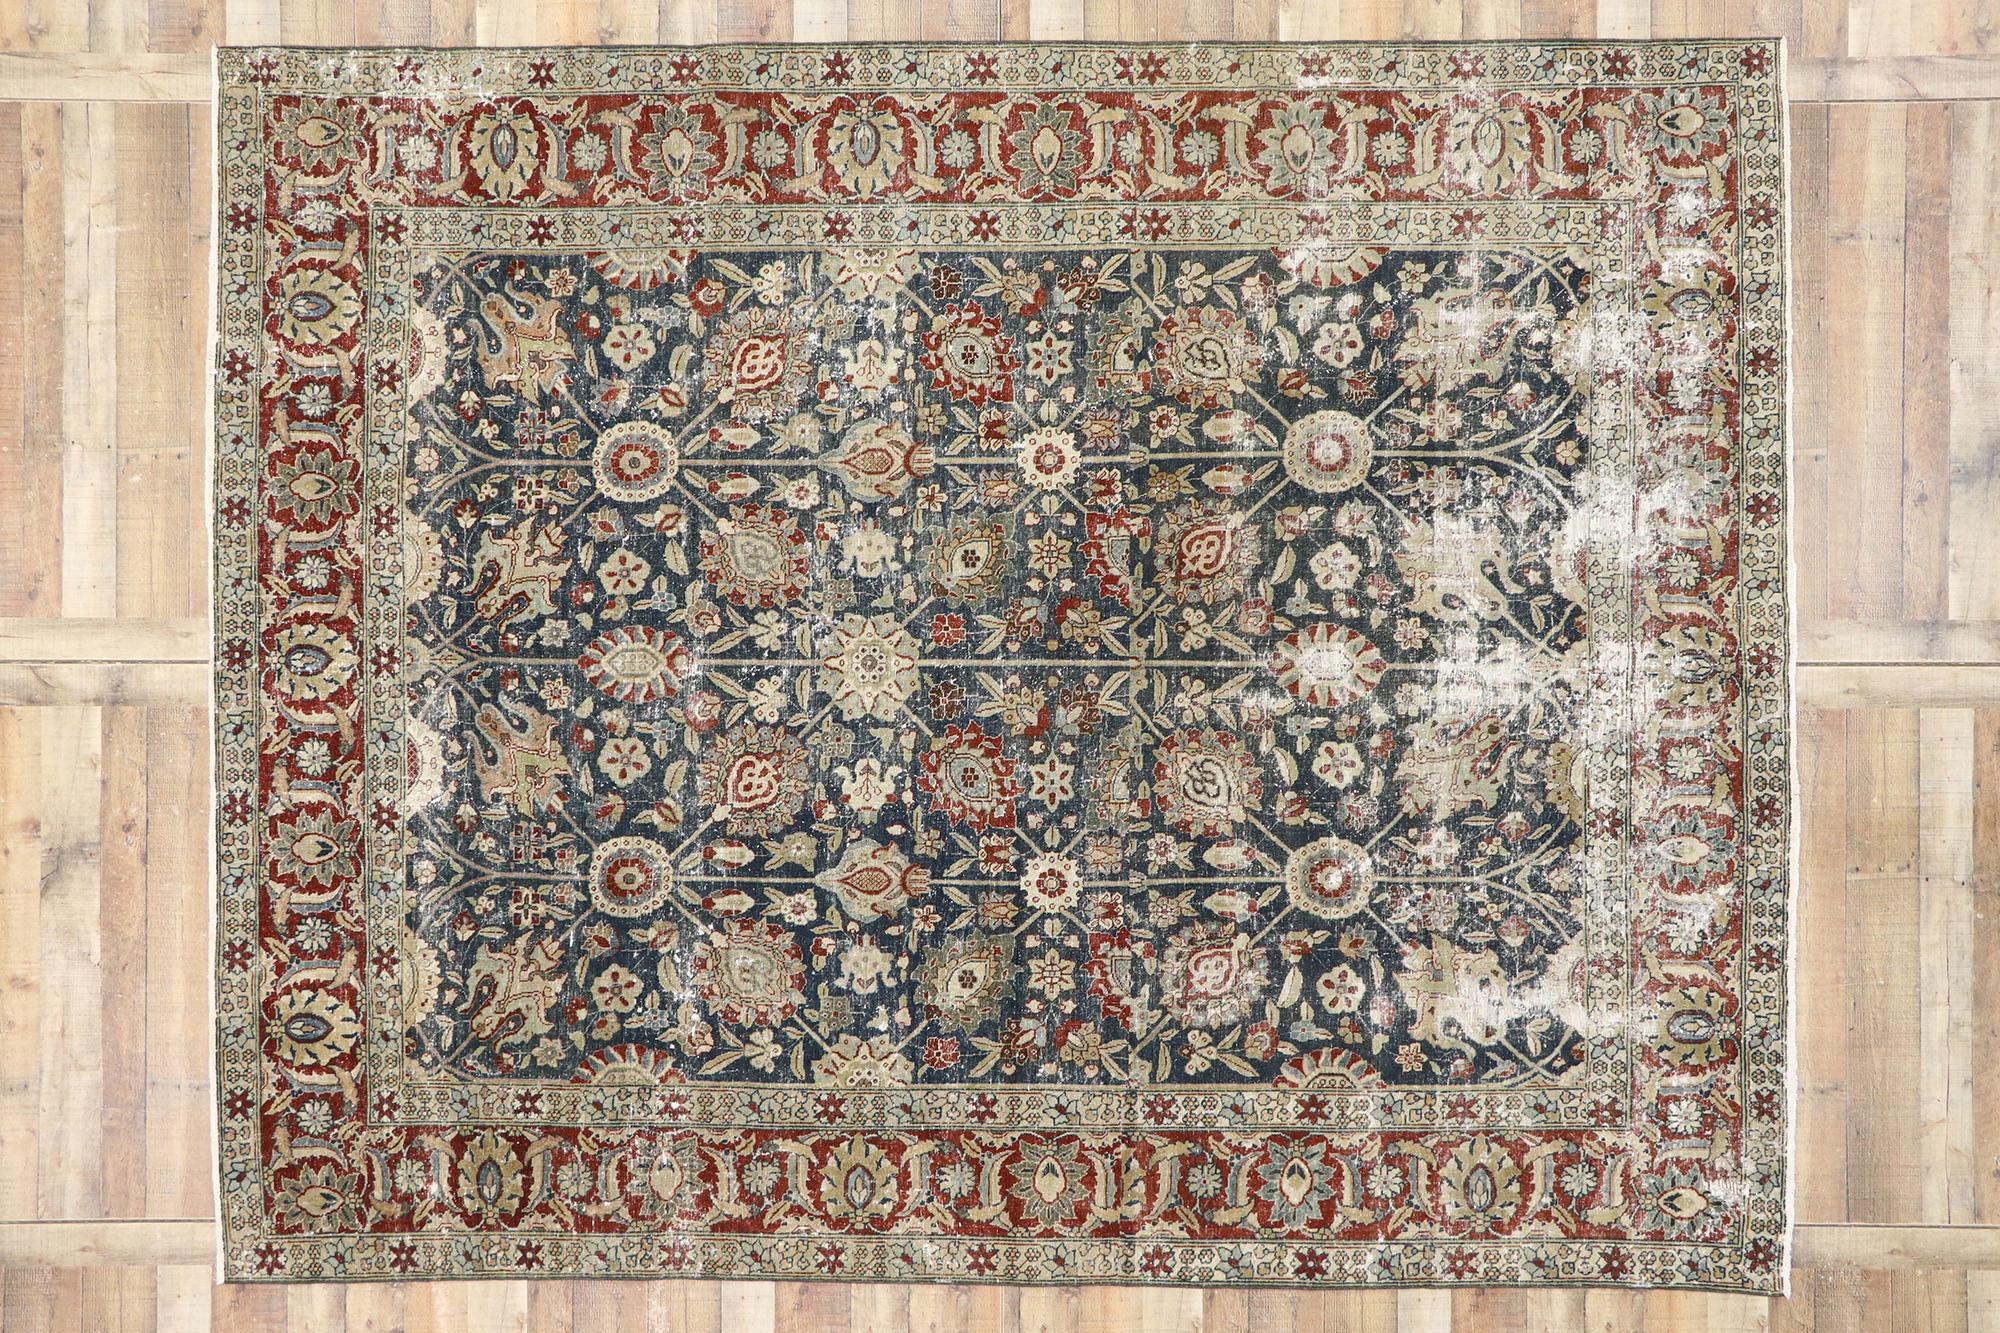 Distressed Antique Persian Tabriz Rug with Rustic Old World English Style For Sale 2